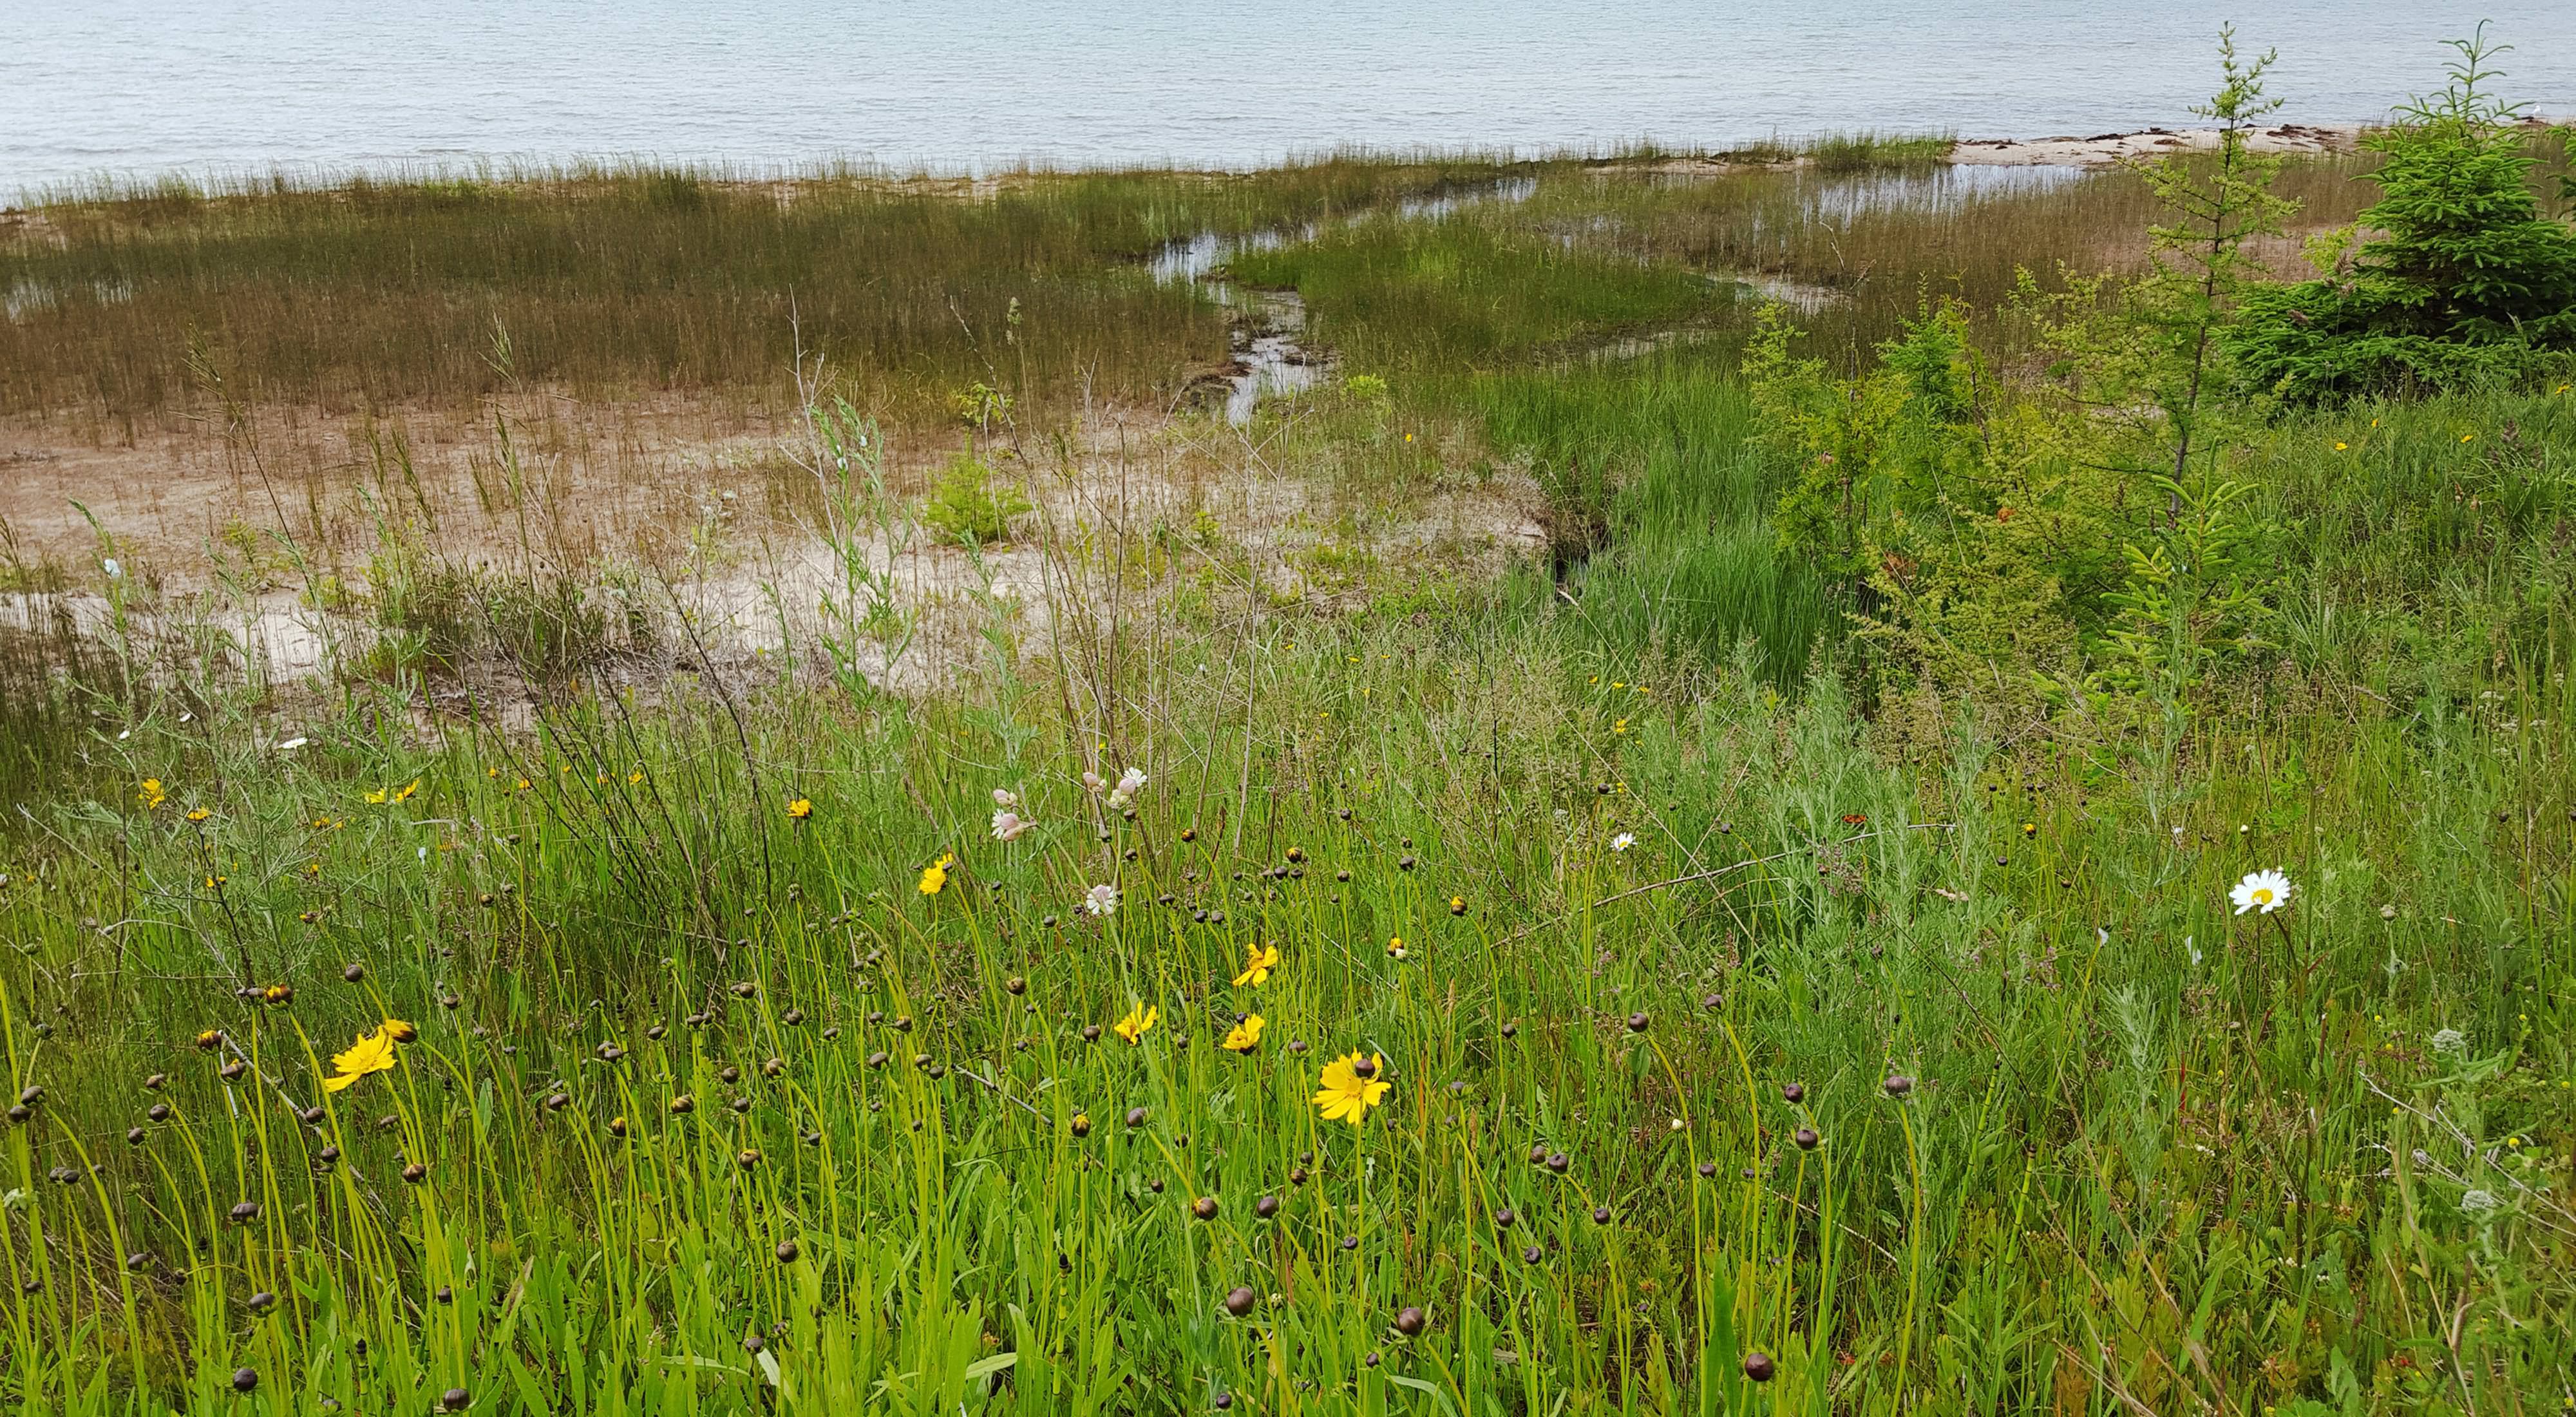 Grasses and wildflowers along the shore of Lake Huron.